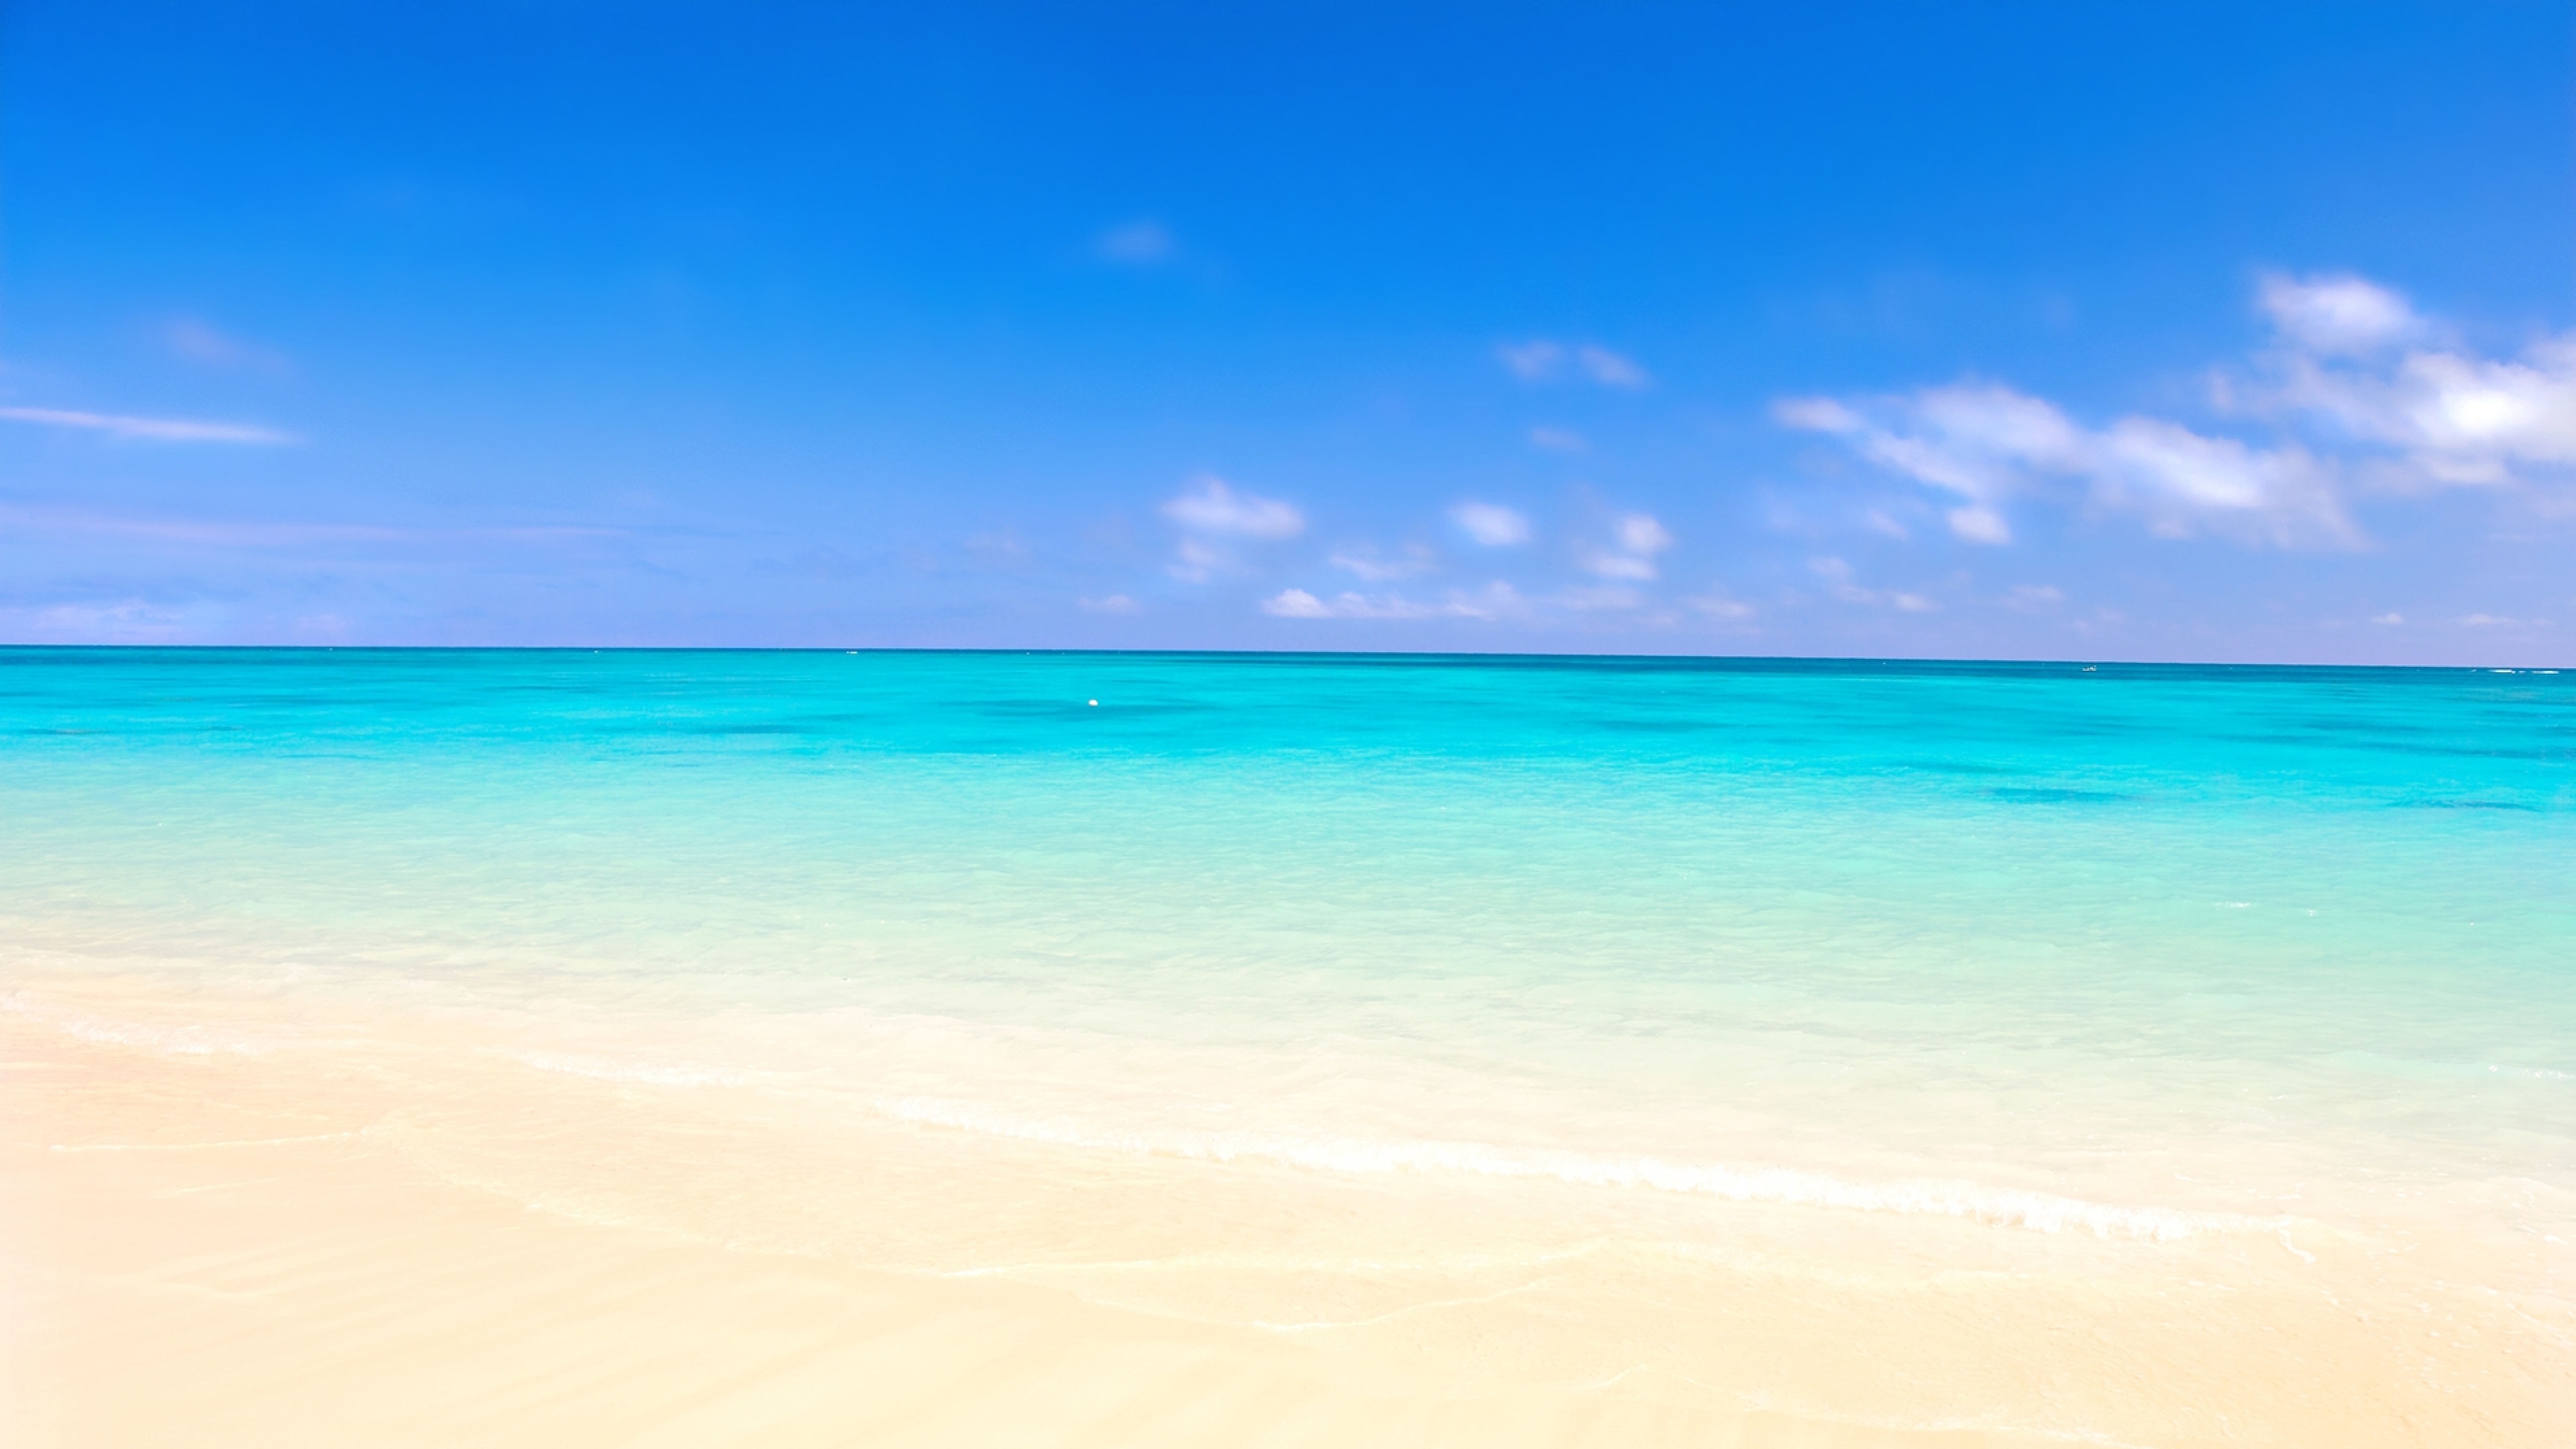 4K Beach Wallpapers High Quality | Download Free